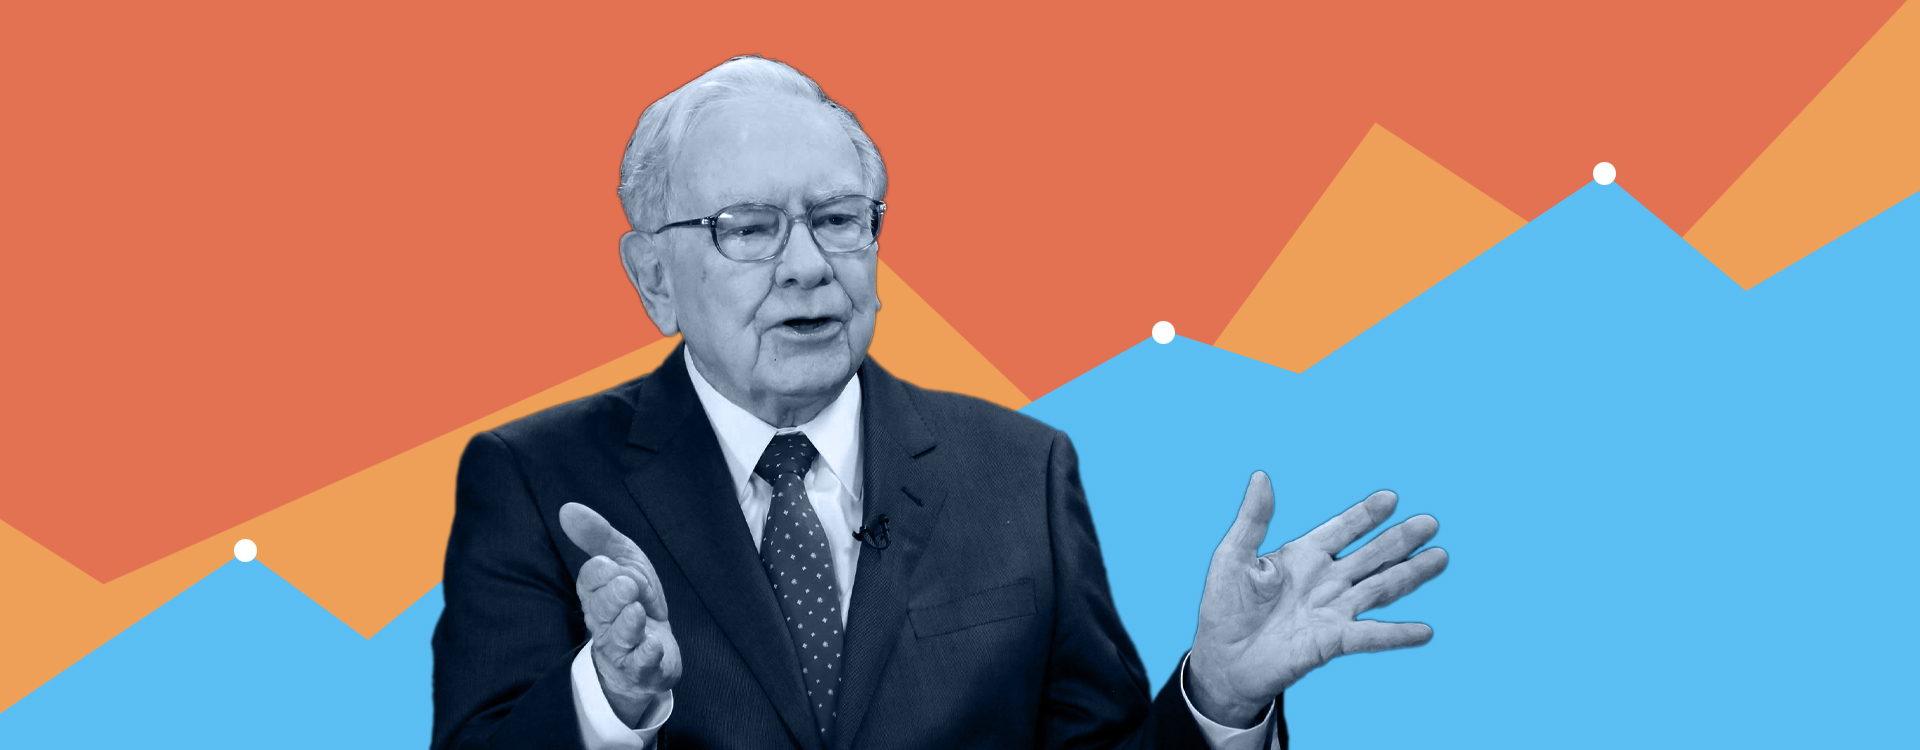 Warren Buffet - a man's journey from simple investor to becoming the chairman of Berkshire Hathaway has several investment lessons for the investors.